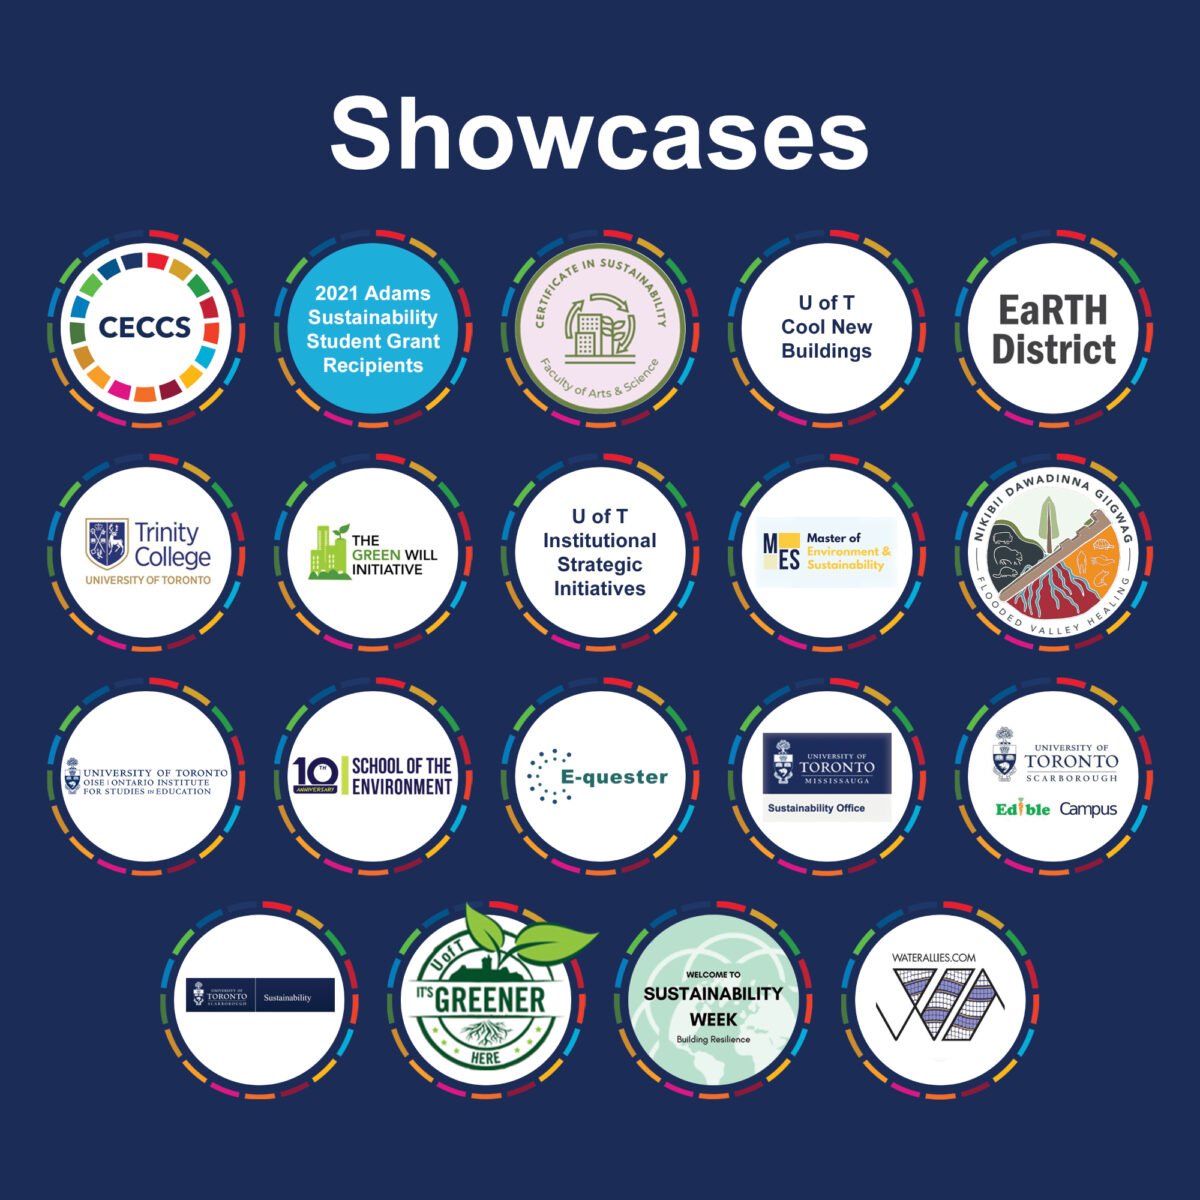 Showcases Info Graphic, showing the logos of the different sustainability initiatives that were showcased during the Celebration